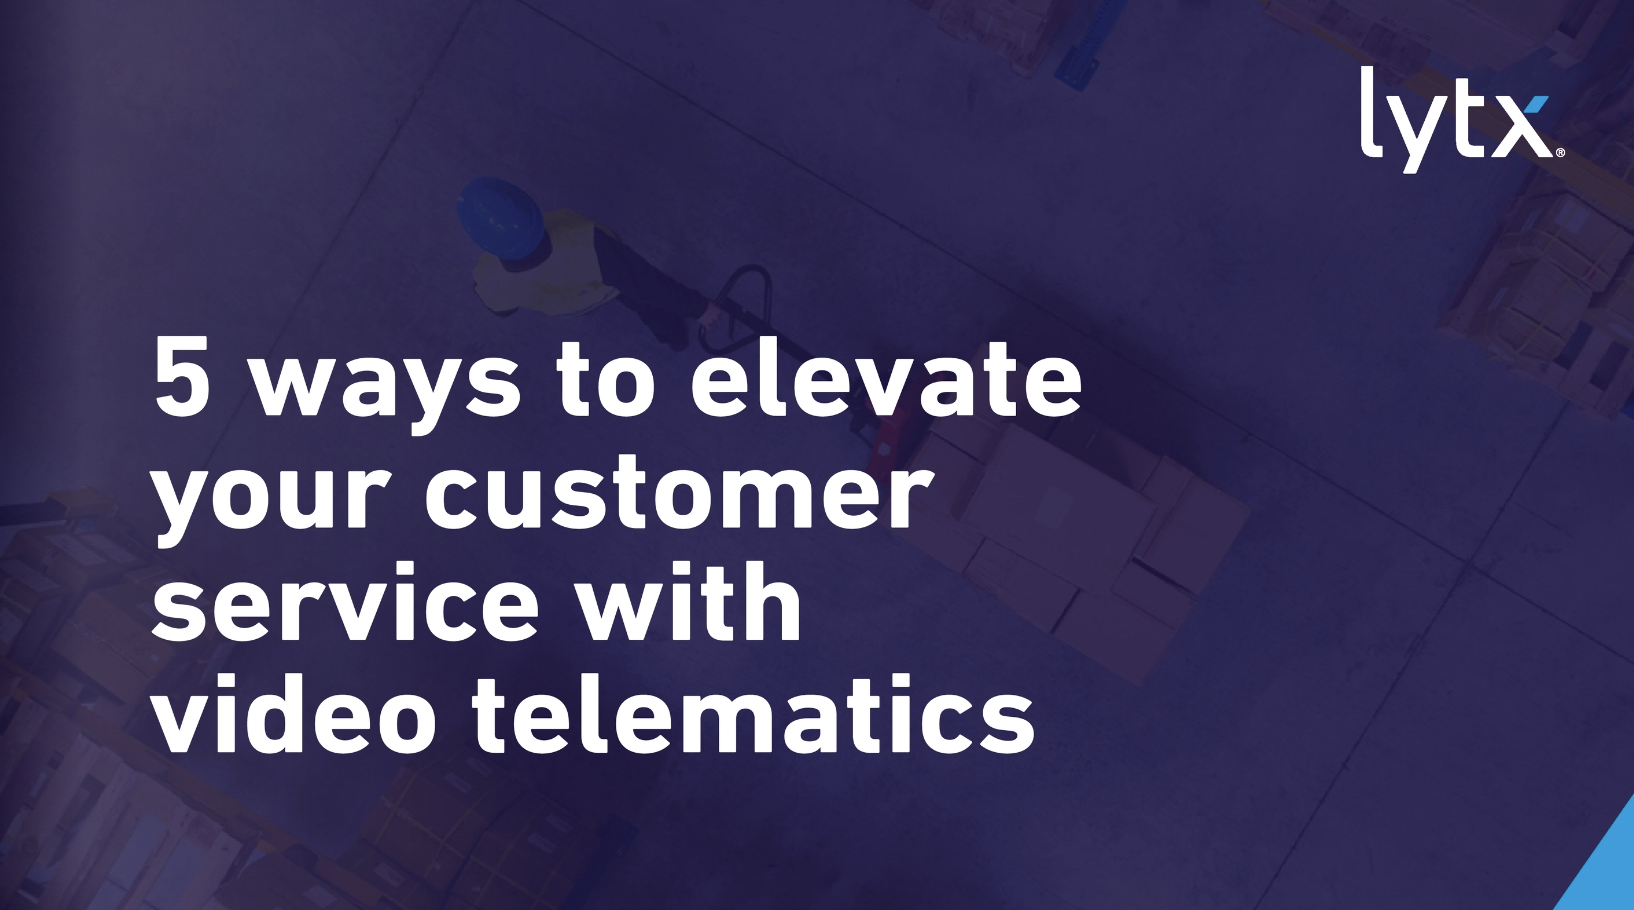 "5 Ways to elevate your customer service with video telematics"